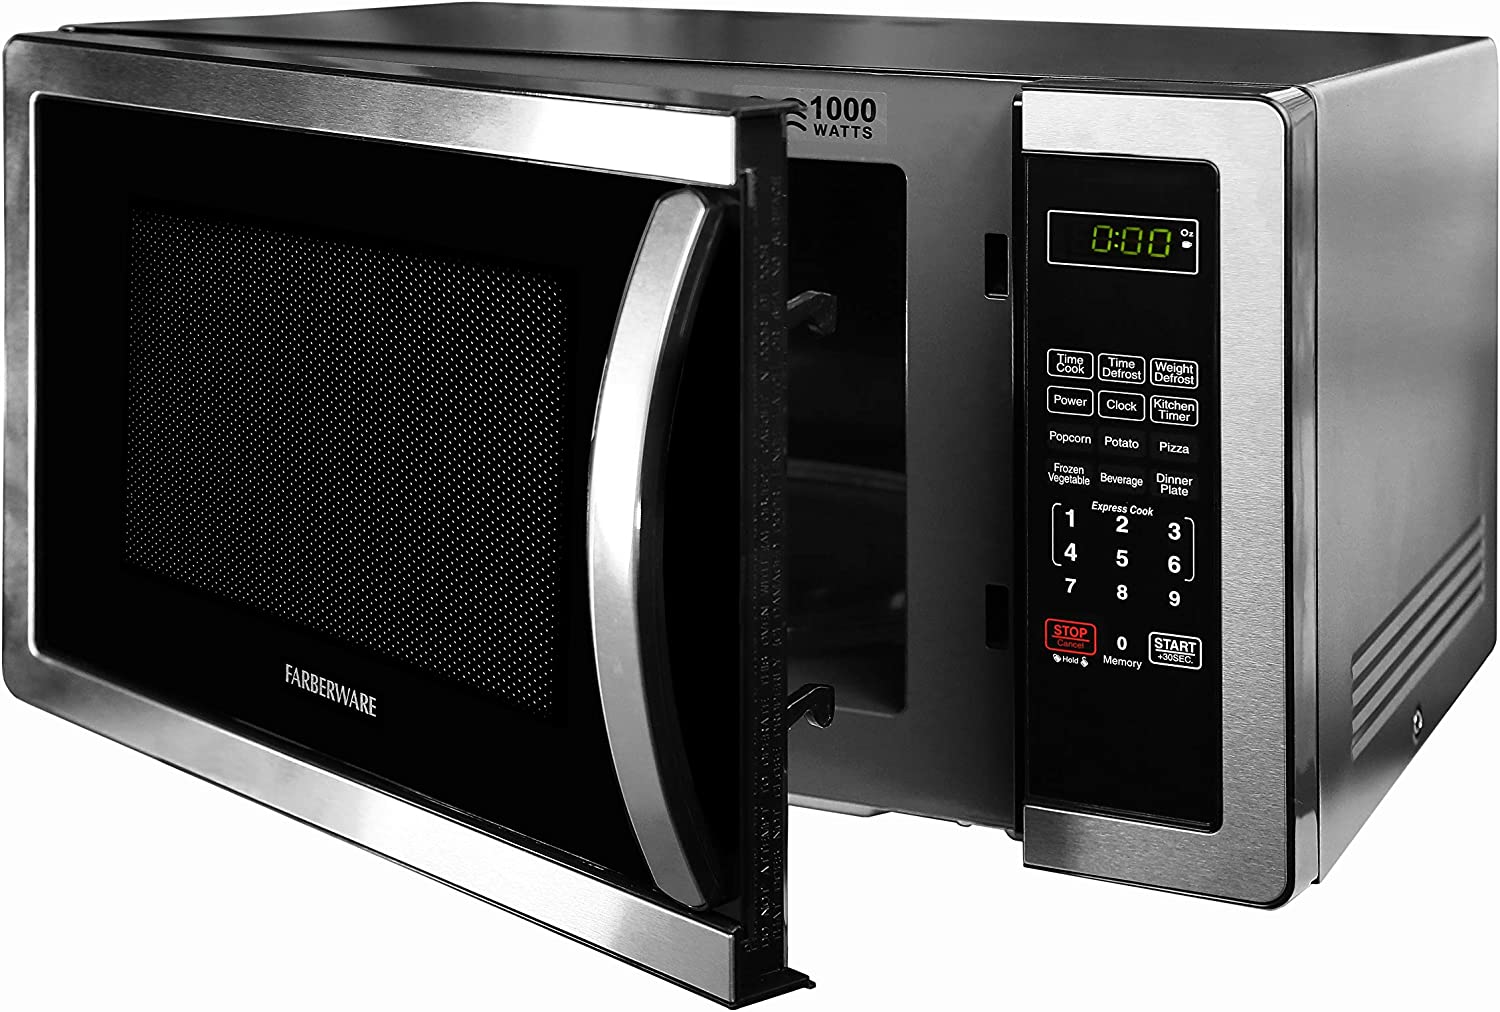 https://discounttoday.net/wp-content/uploads/2022/09/Farberware-FMO11AHTBKB-Countertop-Microwave-1.1-Cu.-Ft.-1000-Watt-Compact-Microwave-Oven-with-LED-lighting-Child-lock-and-Easy-Clean-Interior-Stainless-Steel-Interior-Exterior7.jpg